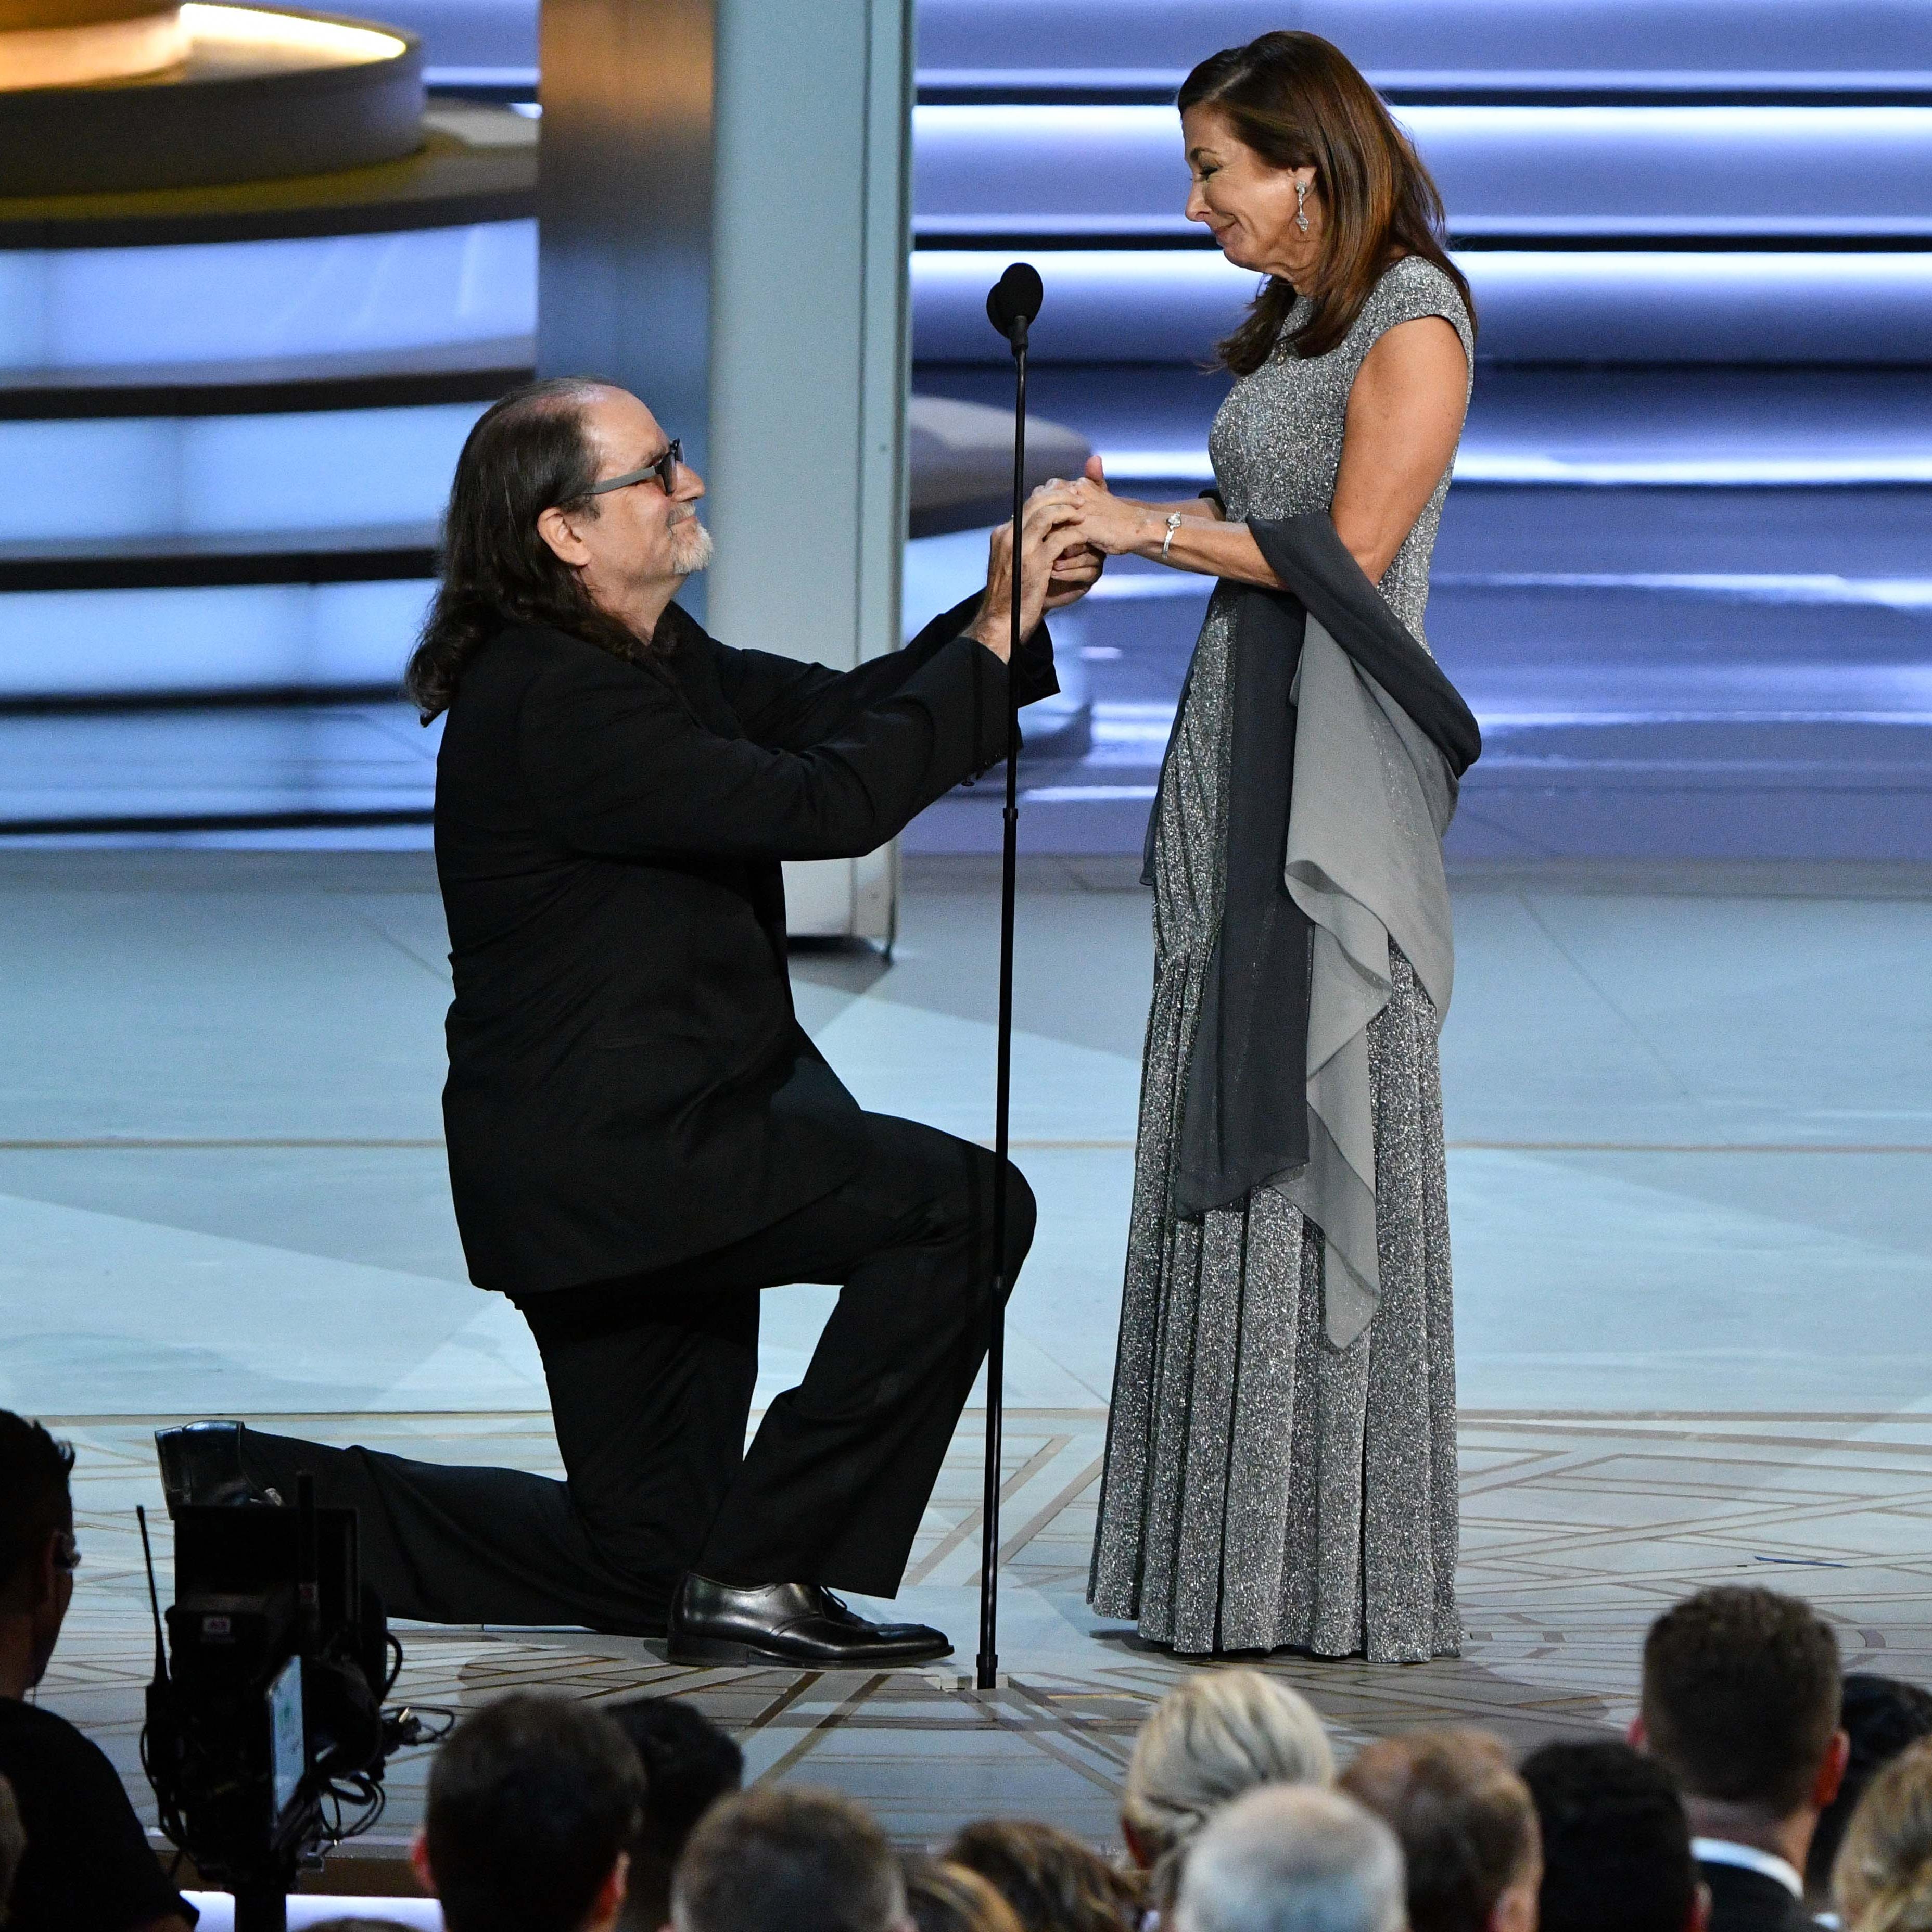 Glenn Weiss, who won his 14th Emmy Award Sunday, proposed to girlfriend Jan Svendsen during the ceremony.